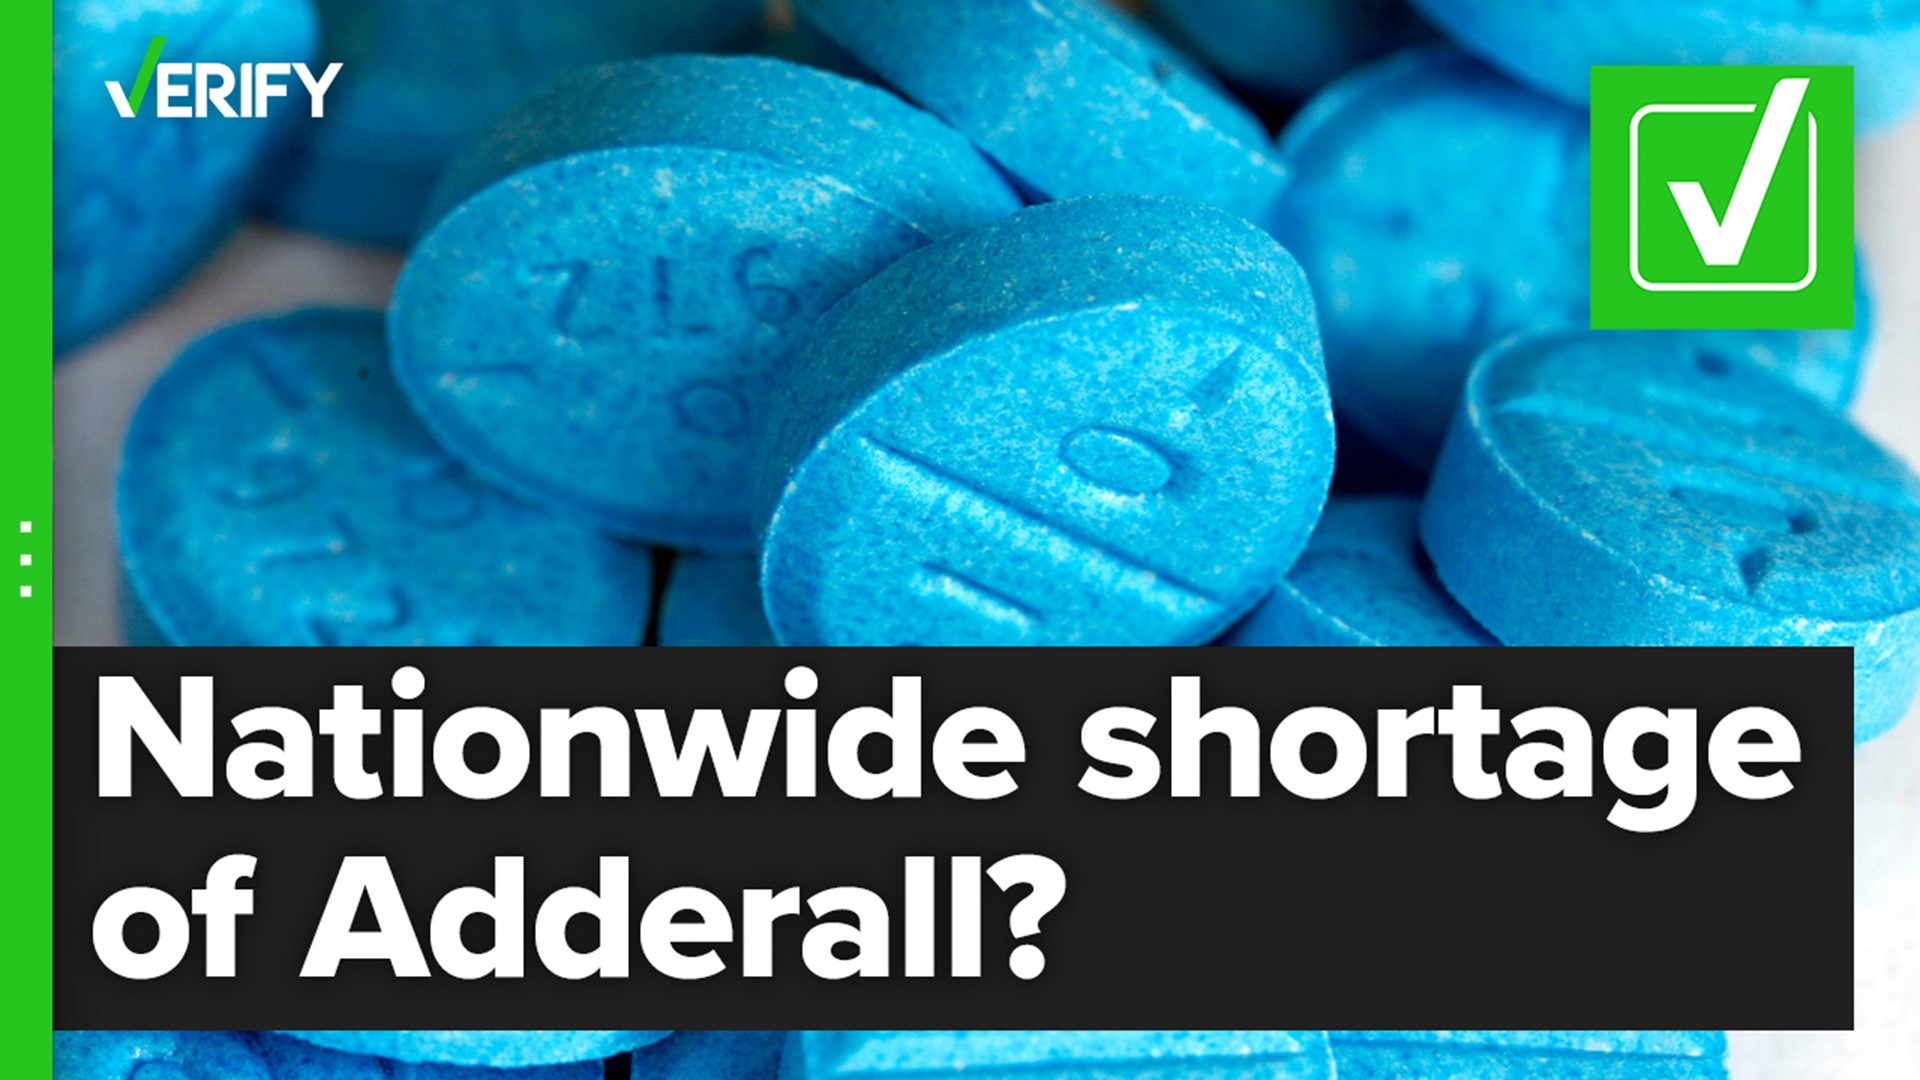 People with ADHD are having trouble filling Adderall prescriptions at some pharmacies because of a nationwide shortage in both brand-name and generic Adderall.